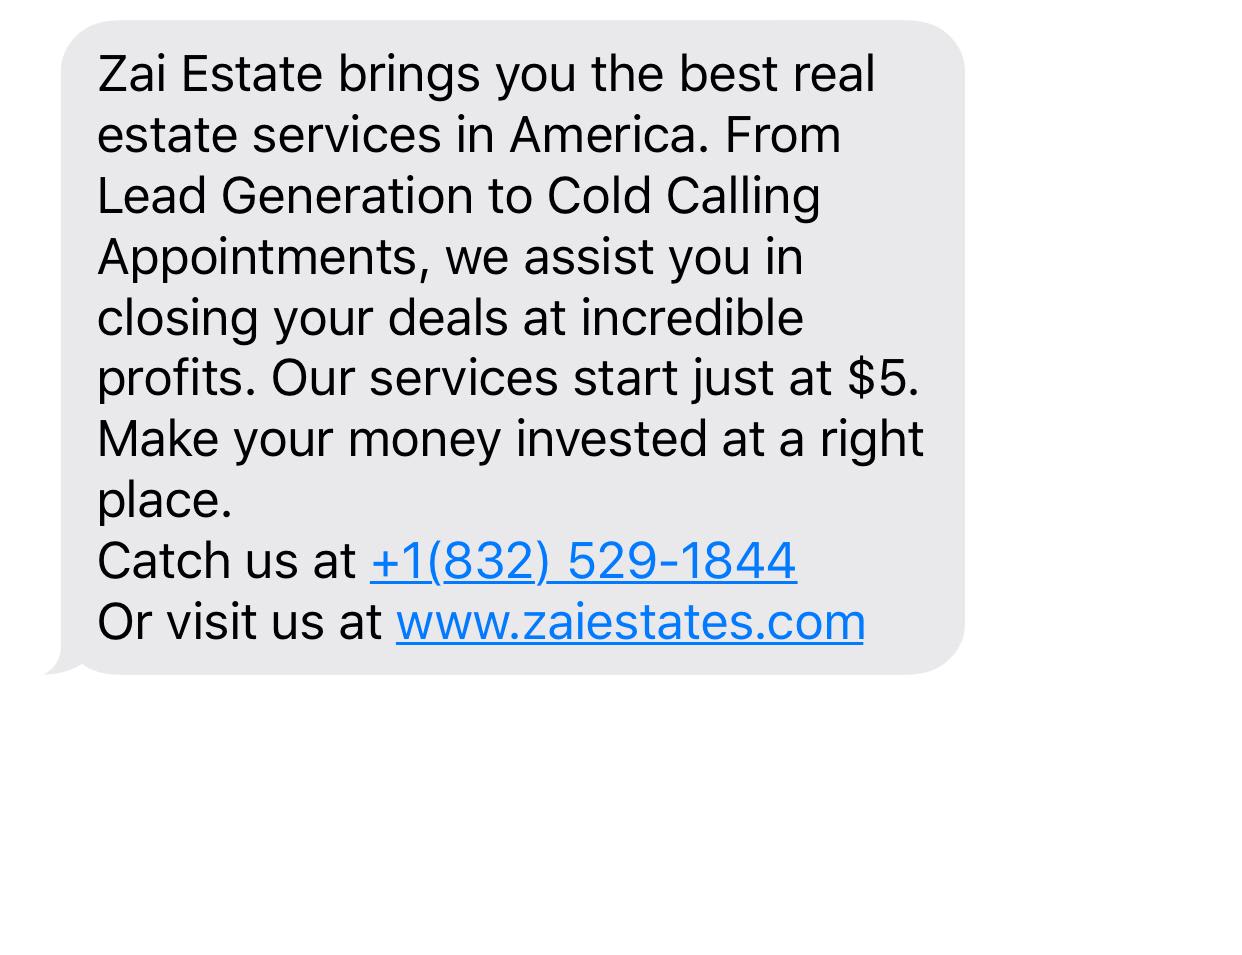 Real Estate Text Message Marketing - Full Guide for 2020